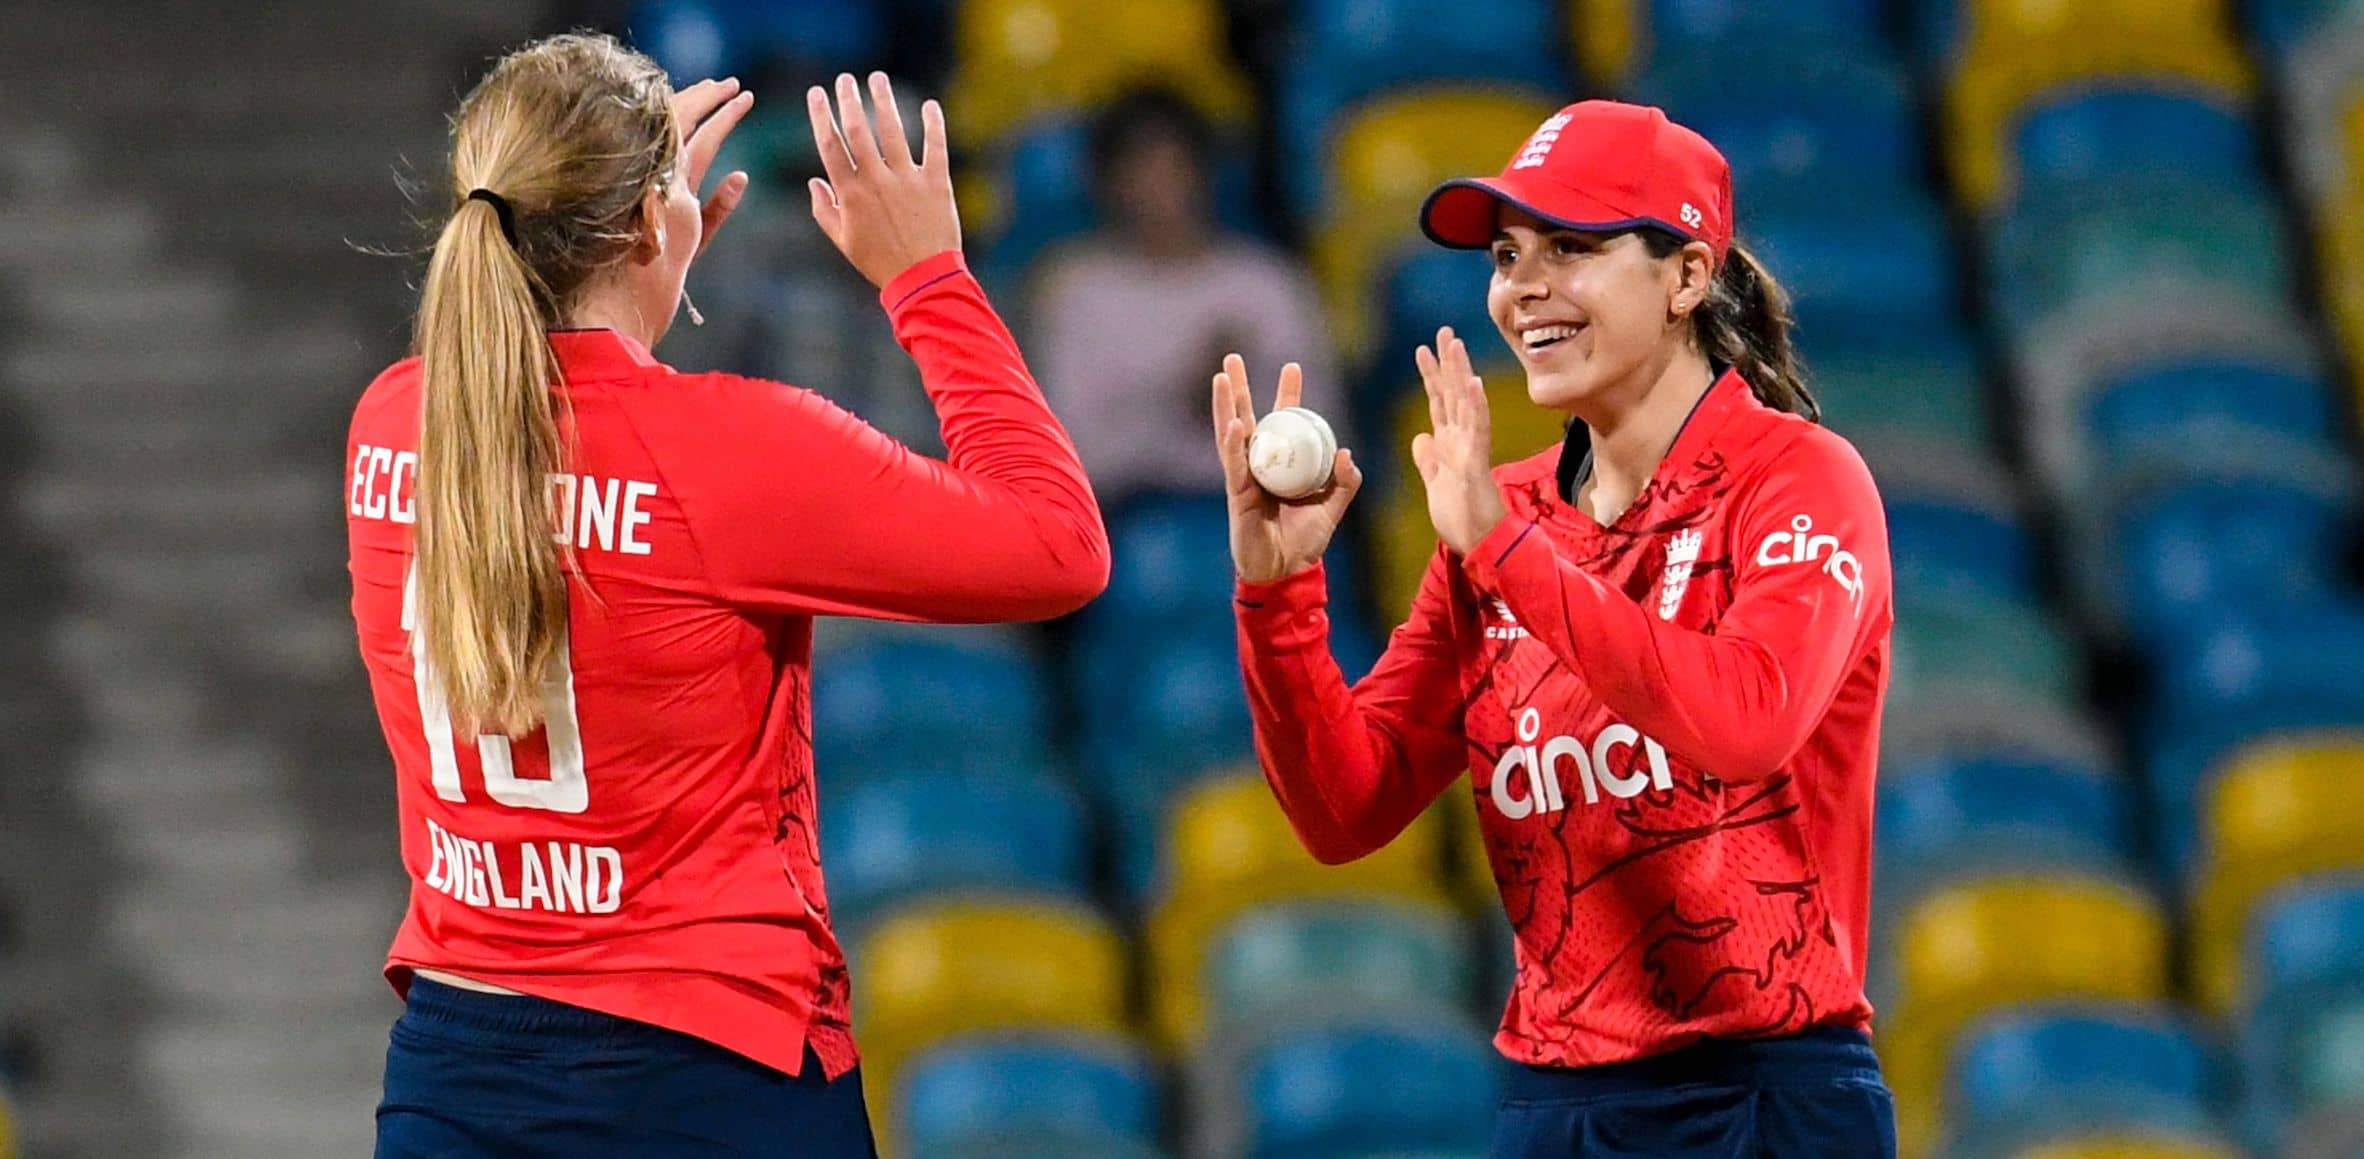 Sophie ecclestone and maia bouchier celebrating at the kensington oval, barbados.